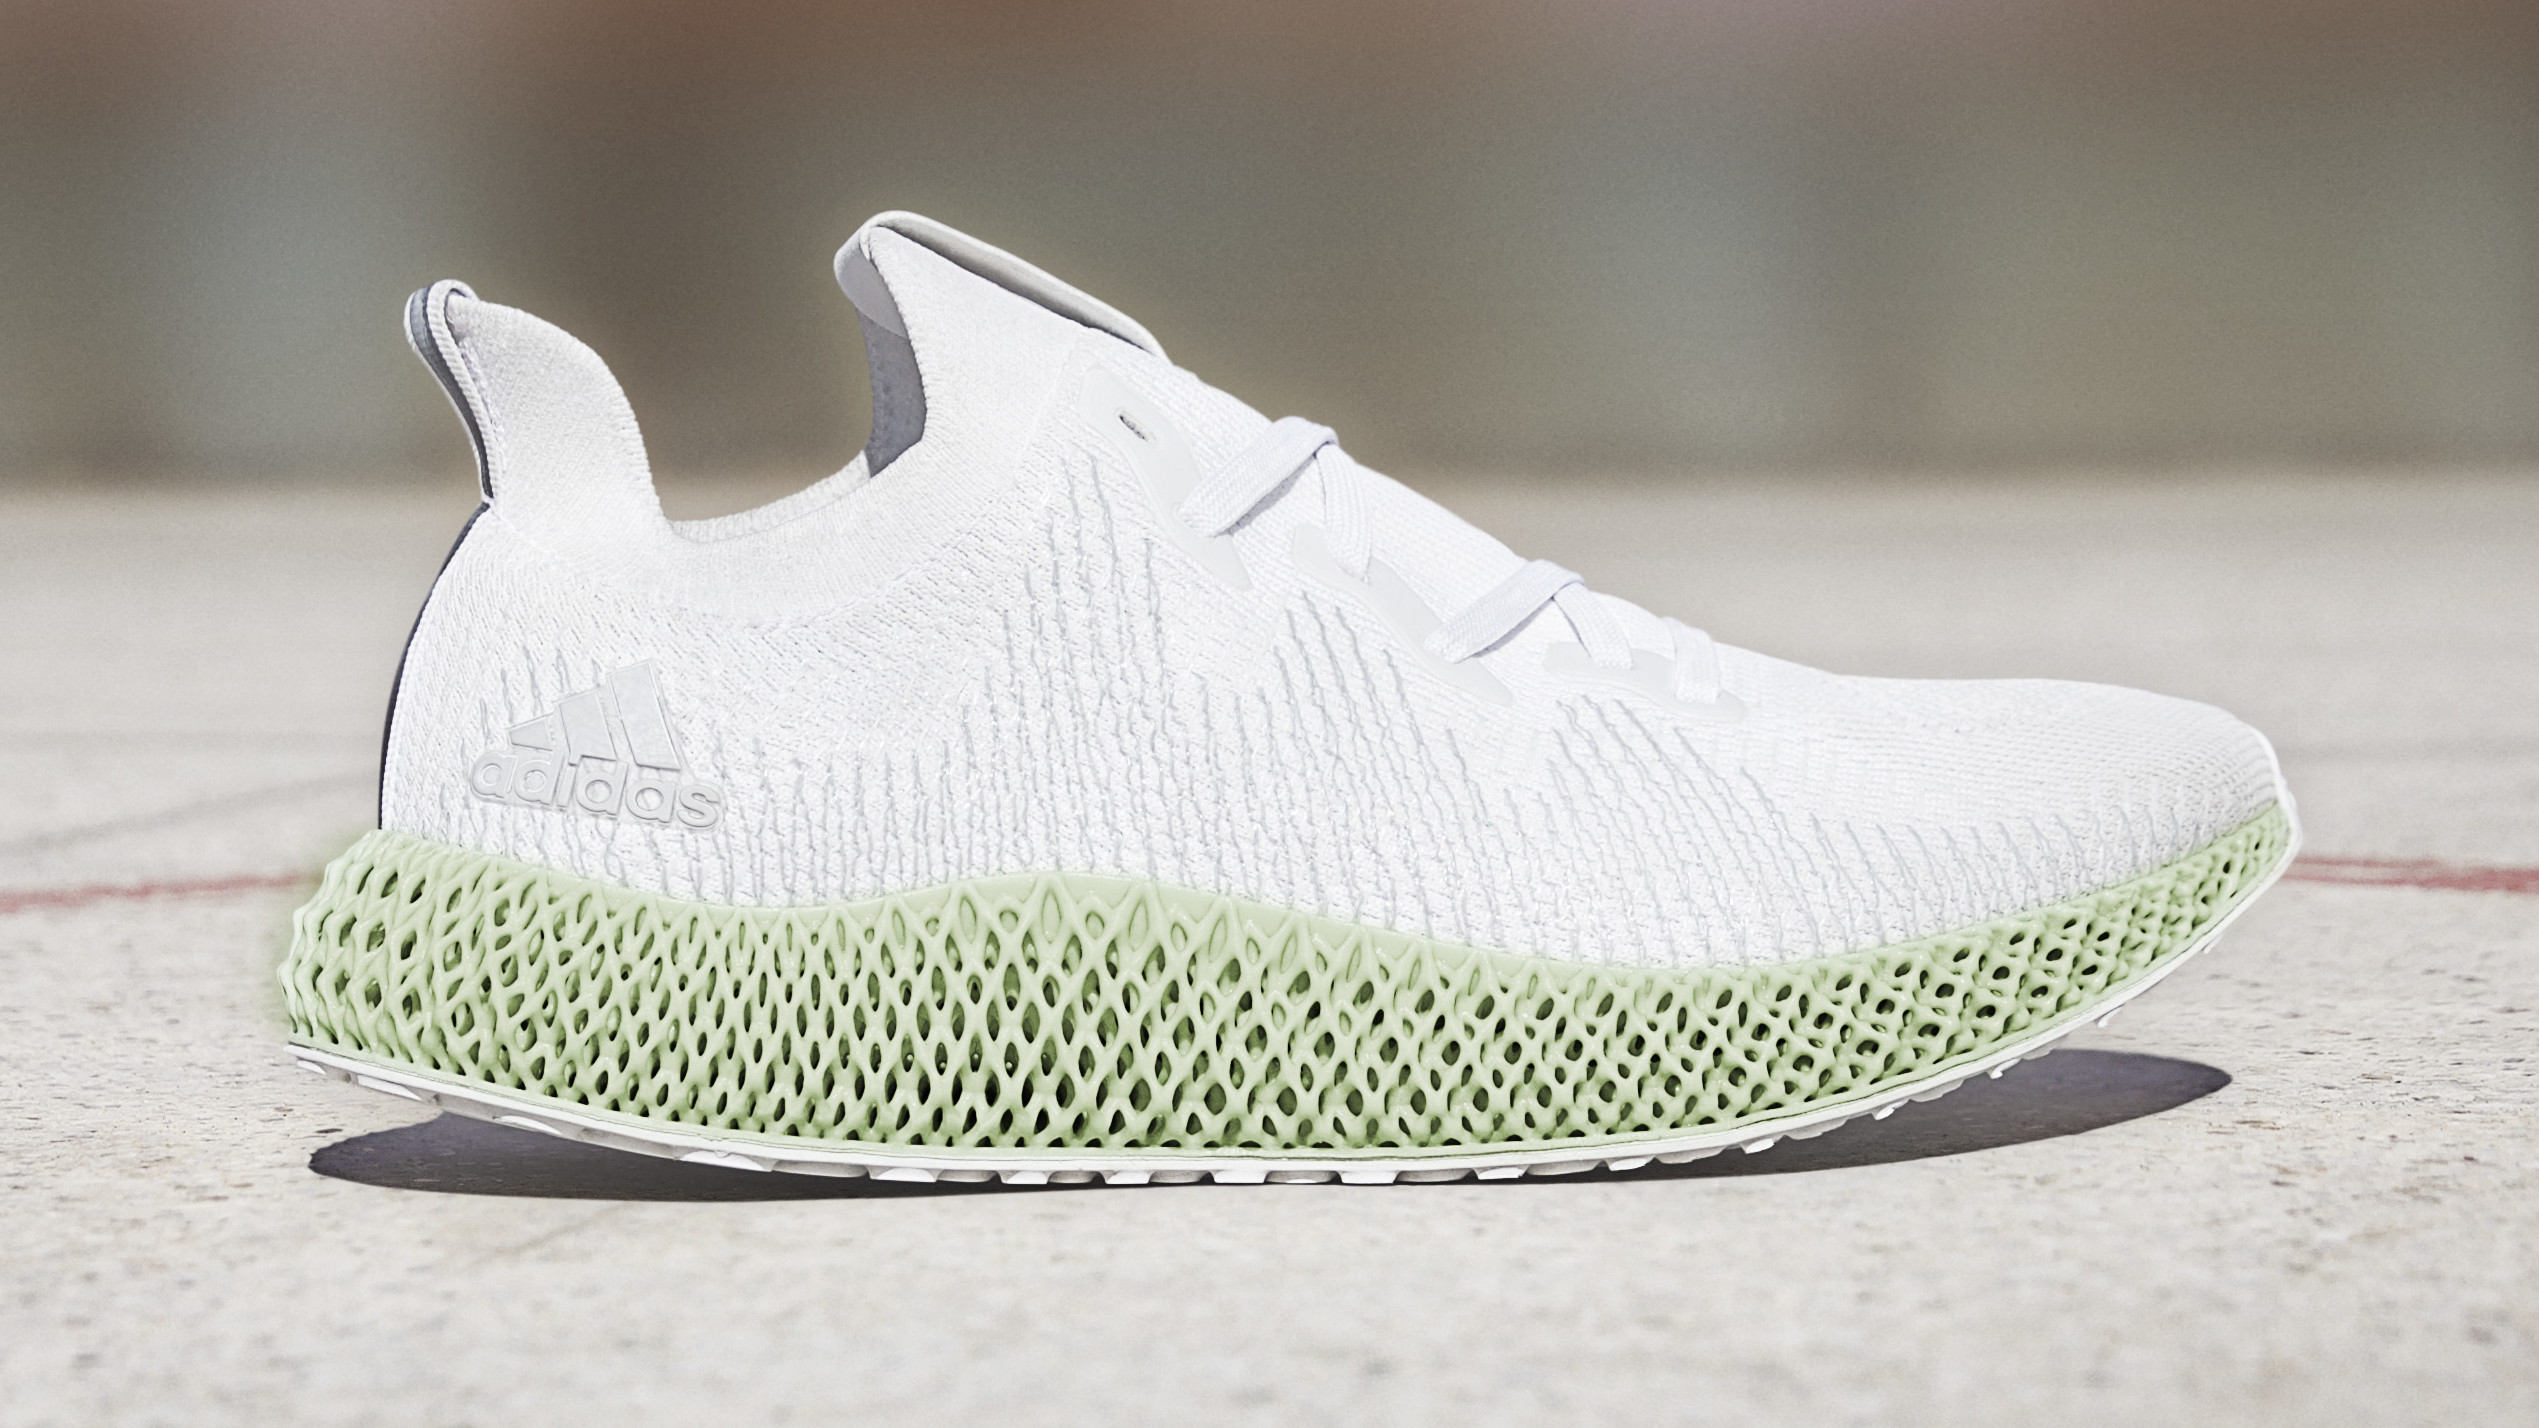 Adidas Alphaedge 4D 'White' CG5526 Date | Sole Collector